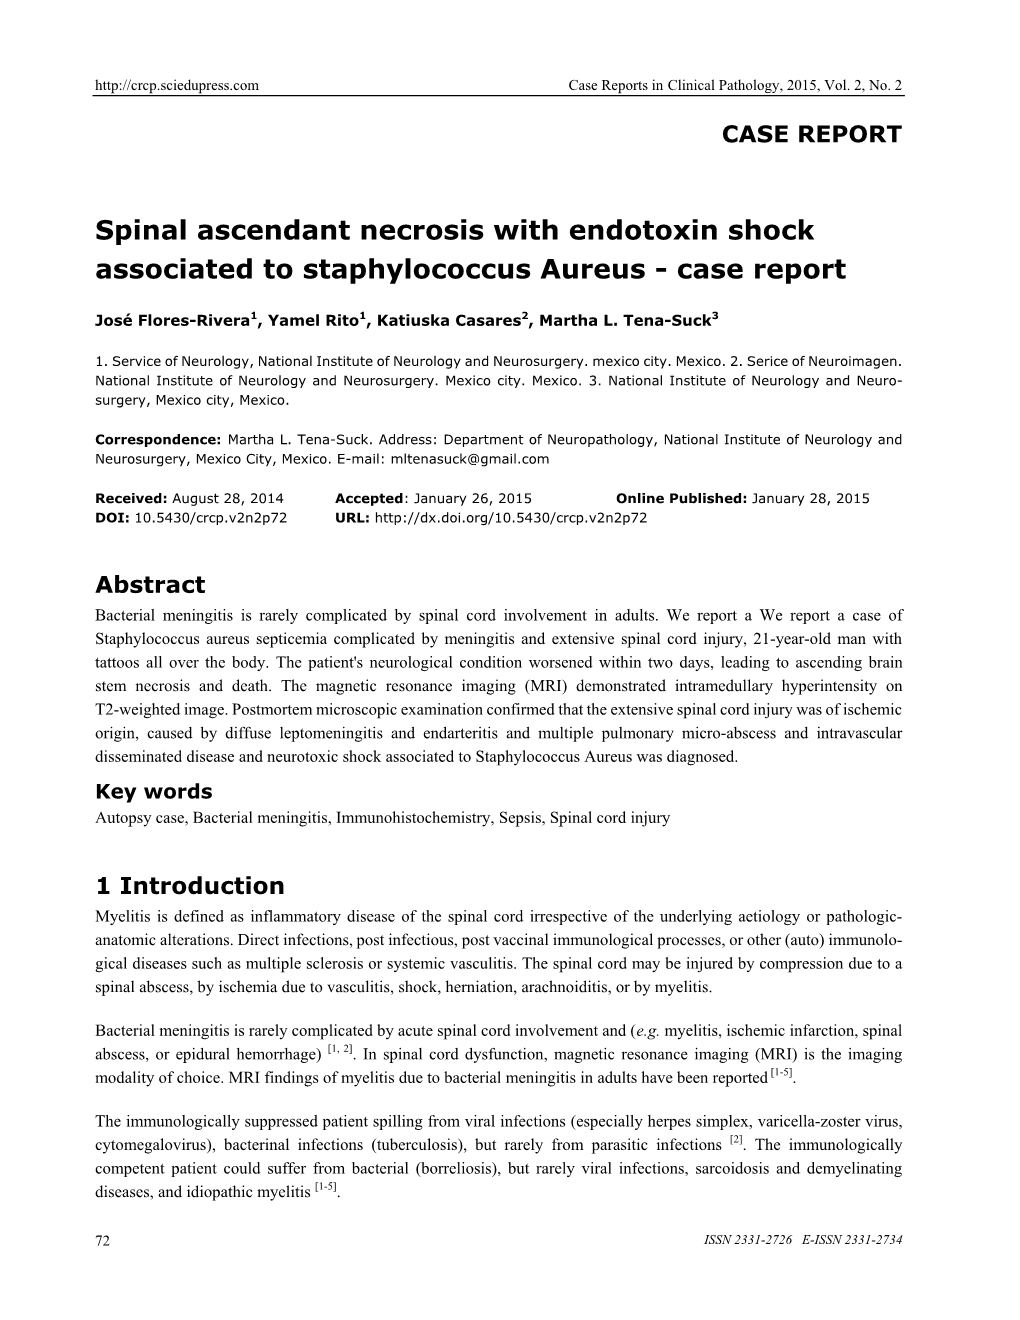 Spinal Ascendant Necrosis with Endotoxin Shock Associated to Staphylococcus Aureus - Case Report